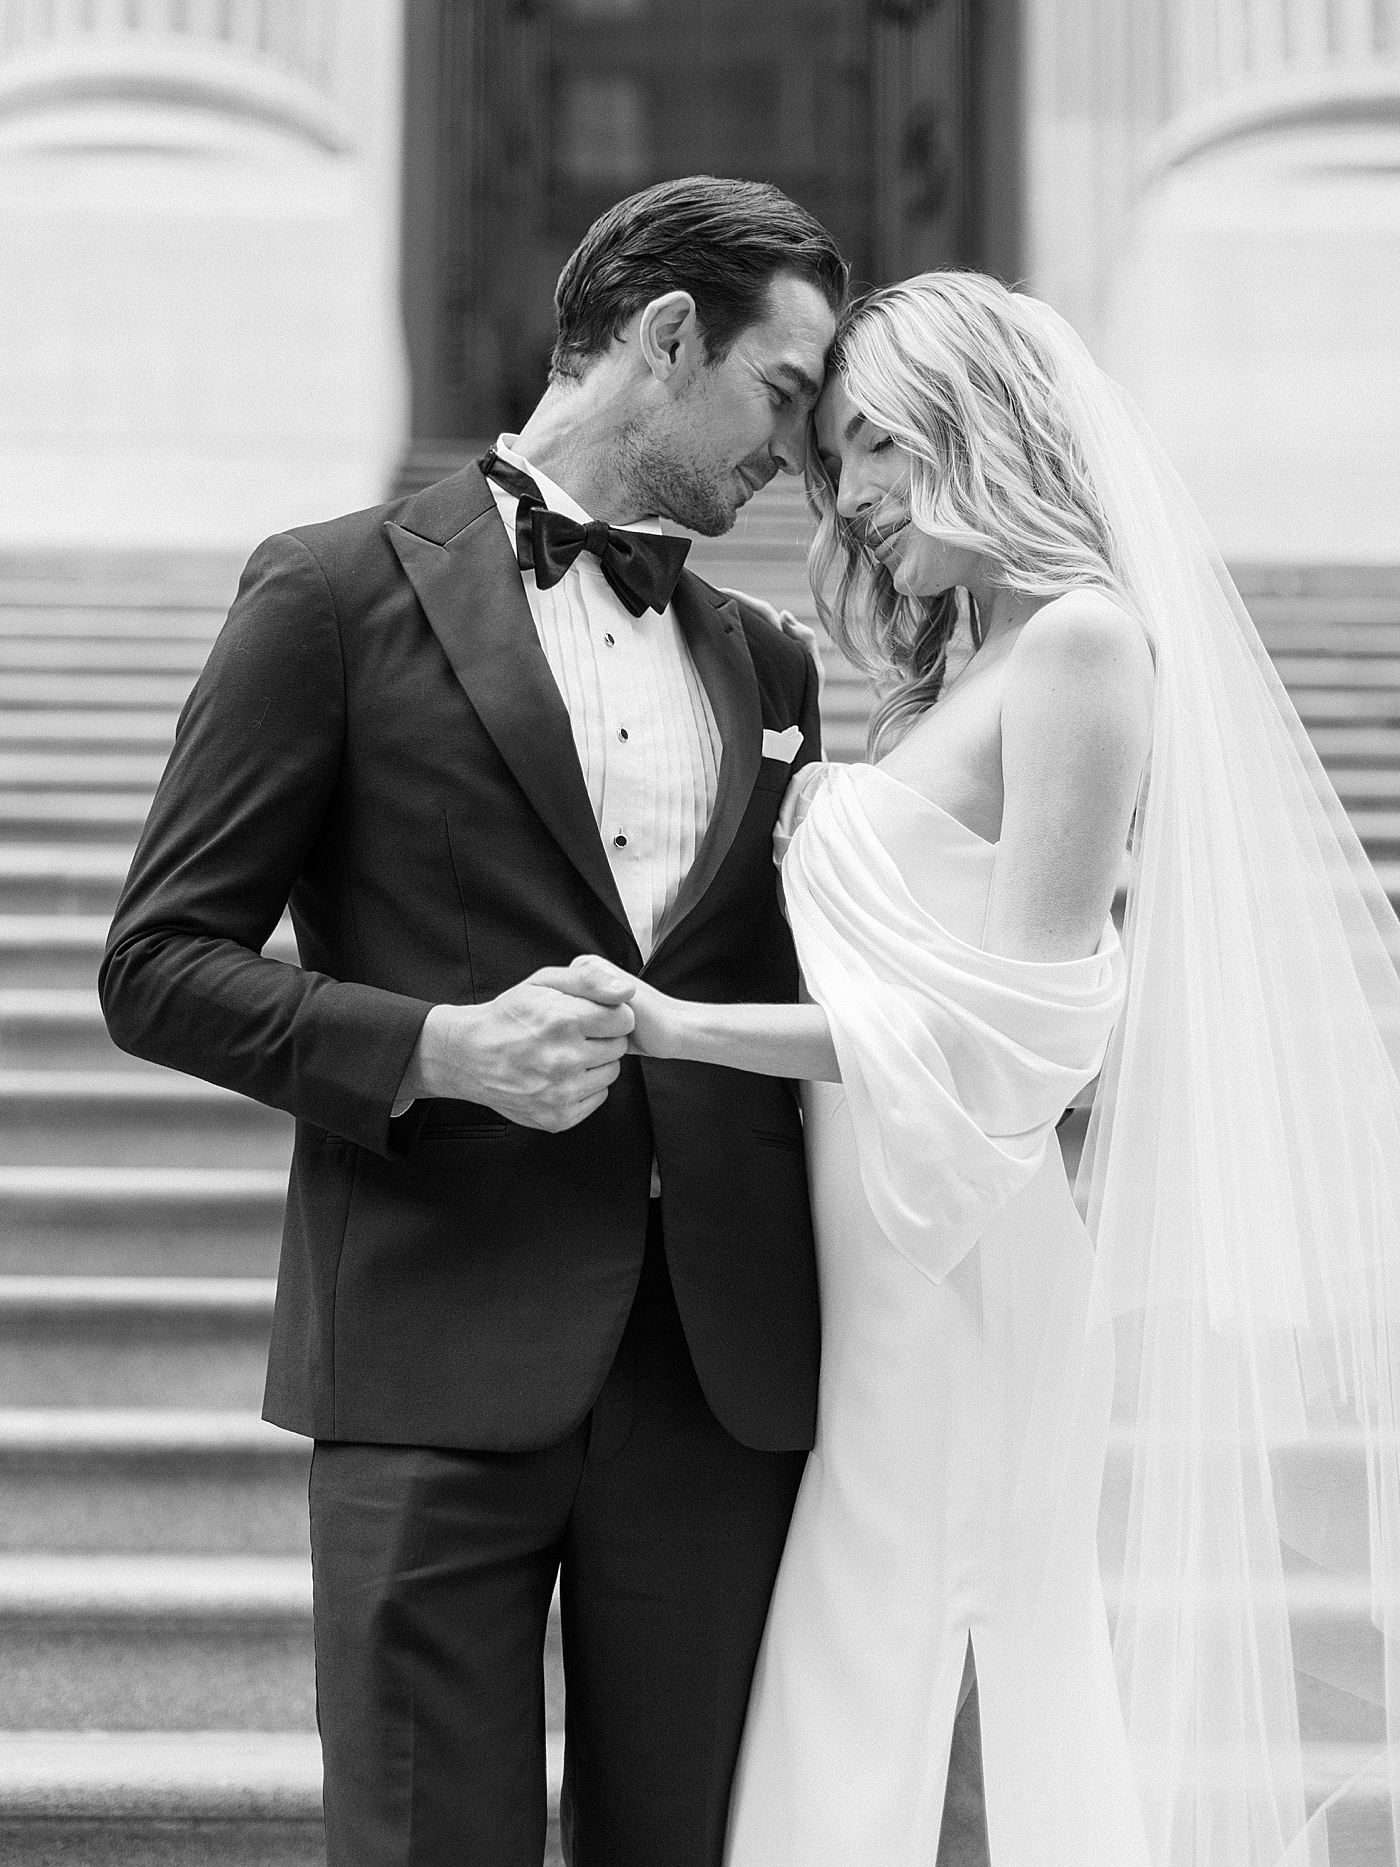 Black and white photo of bride and groom | Photo by Hope Helmuth Photography